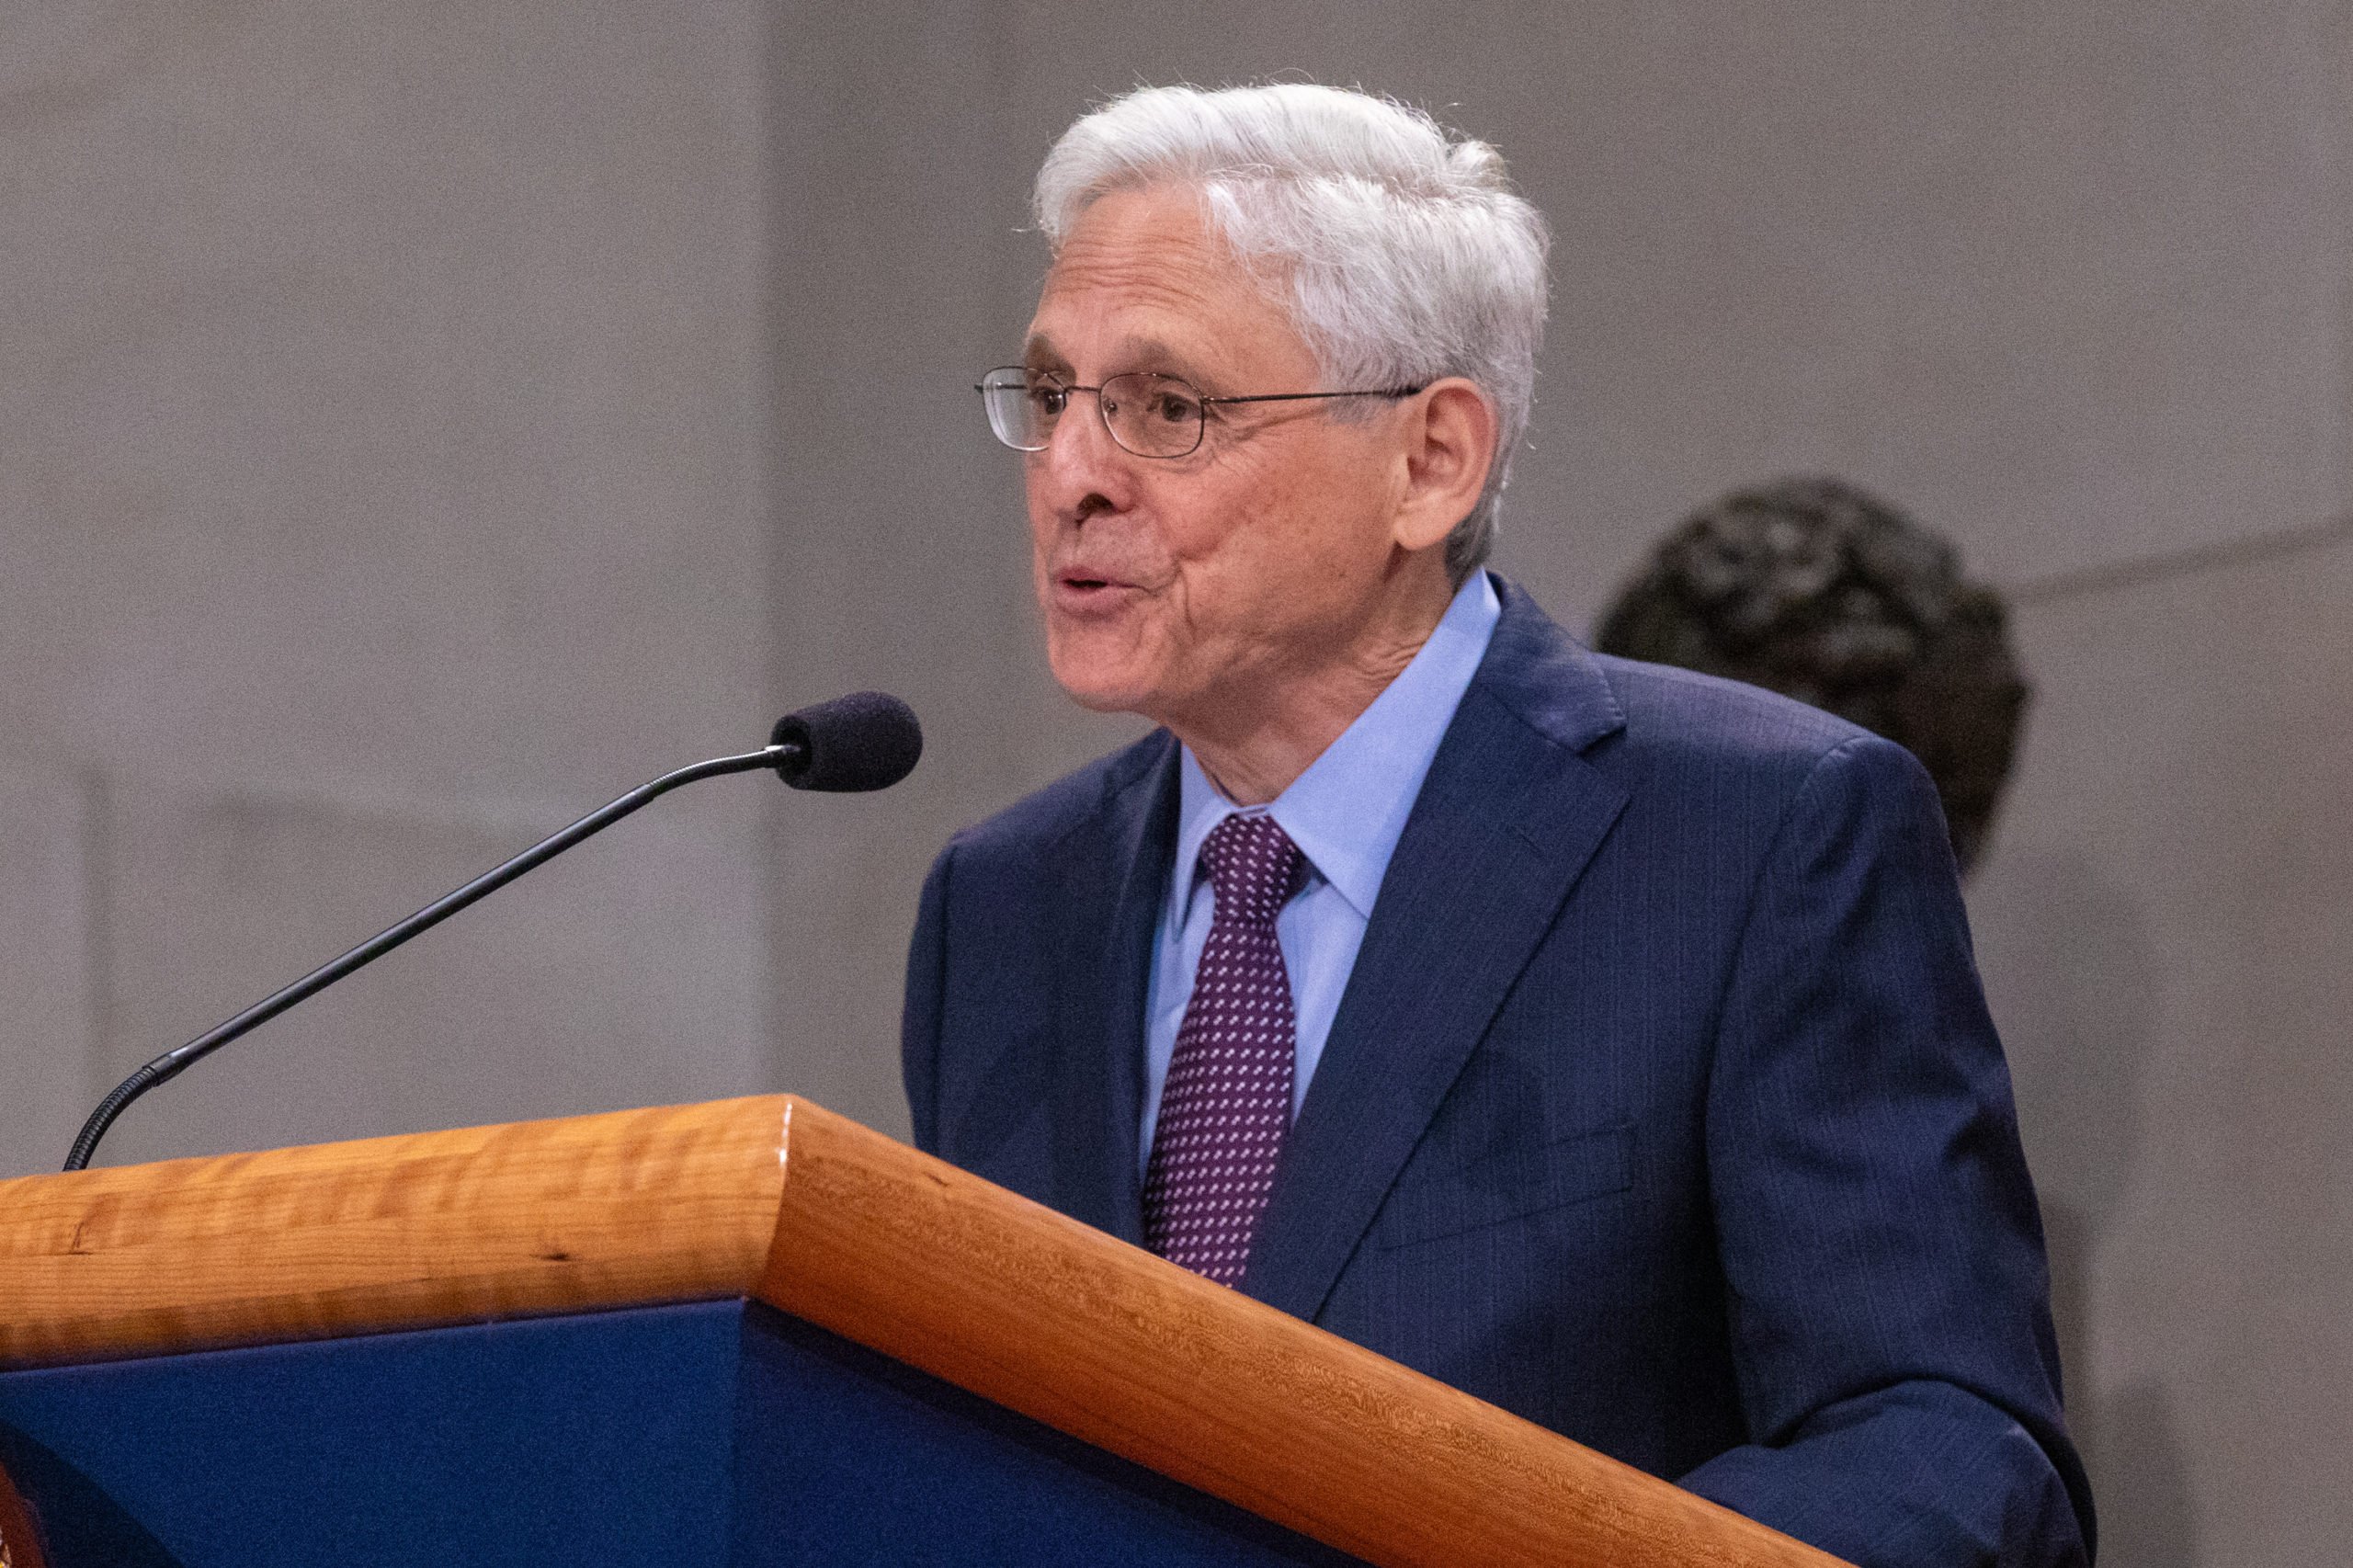 WASHINGTON, DC - JULY 9: US Attorney General Merrick Garland delivers remarks during the commemoration of the 60th anniversary of the 1964 Civil Rights Act at the US Department of Justice on July 9, 2024 in Washington, DC. The Act prohibits discrimination on the basis of race, color, religion, sex, or national origin. (Photo by Anna Rose Layden/Getty Images)